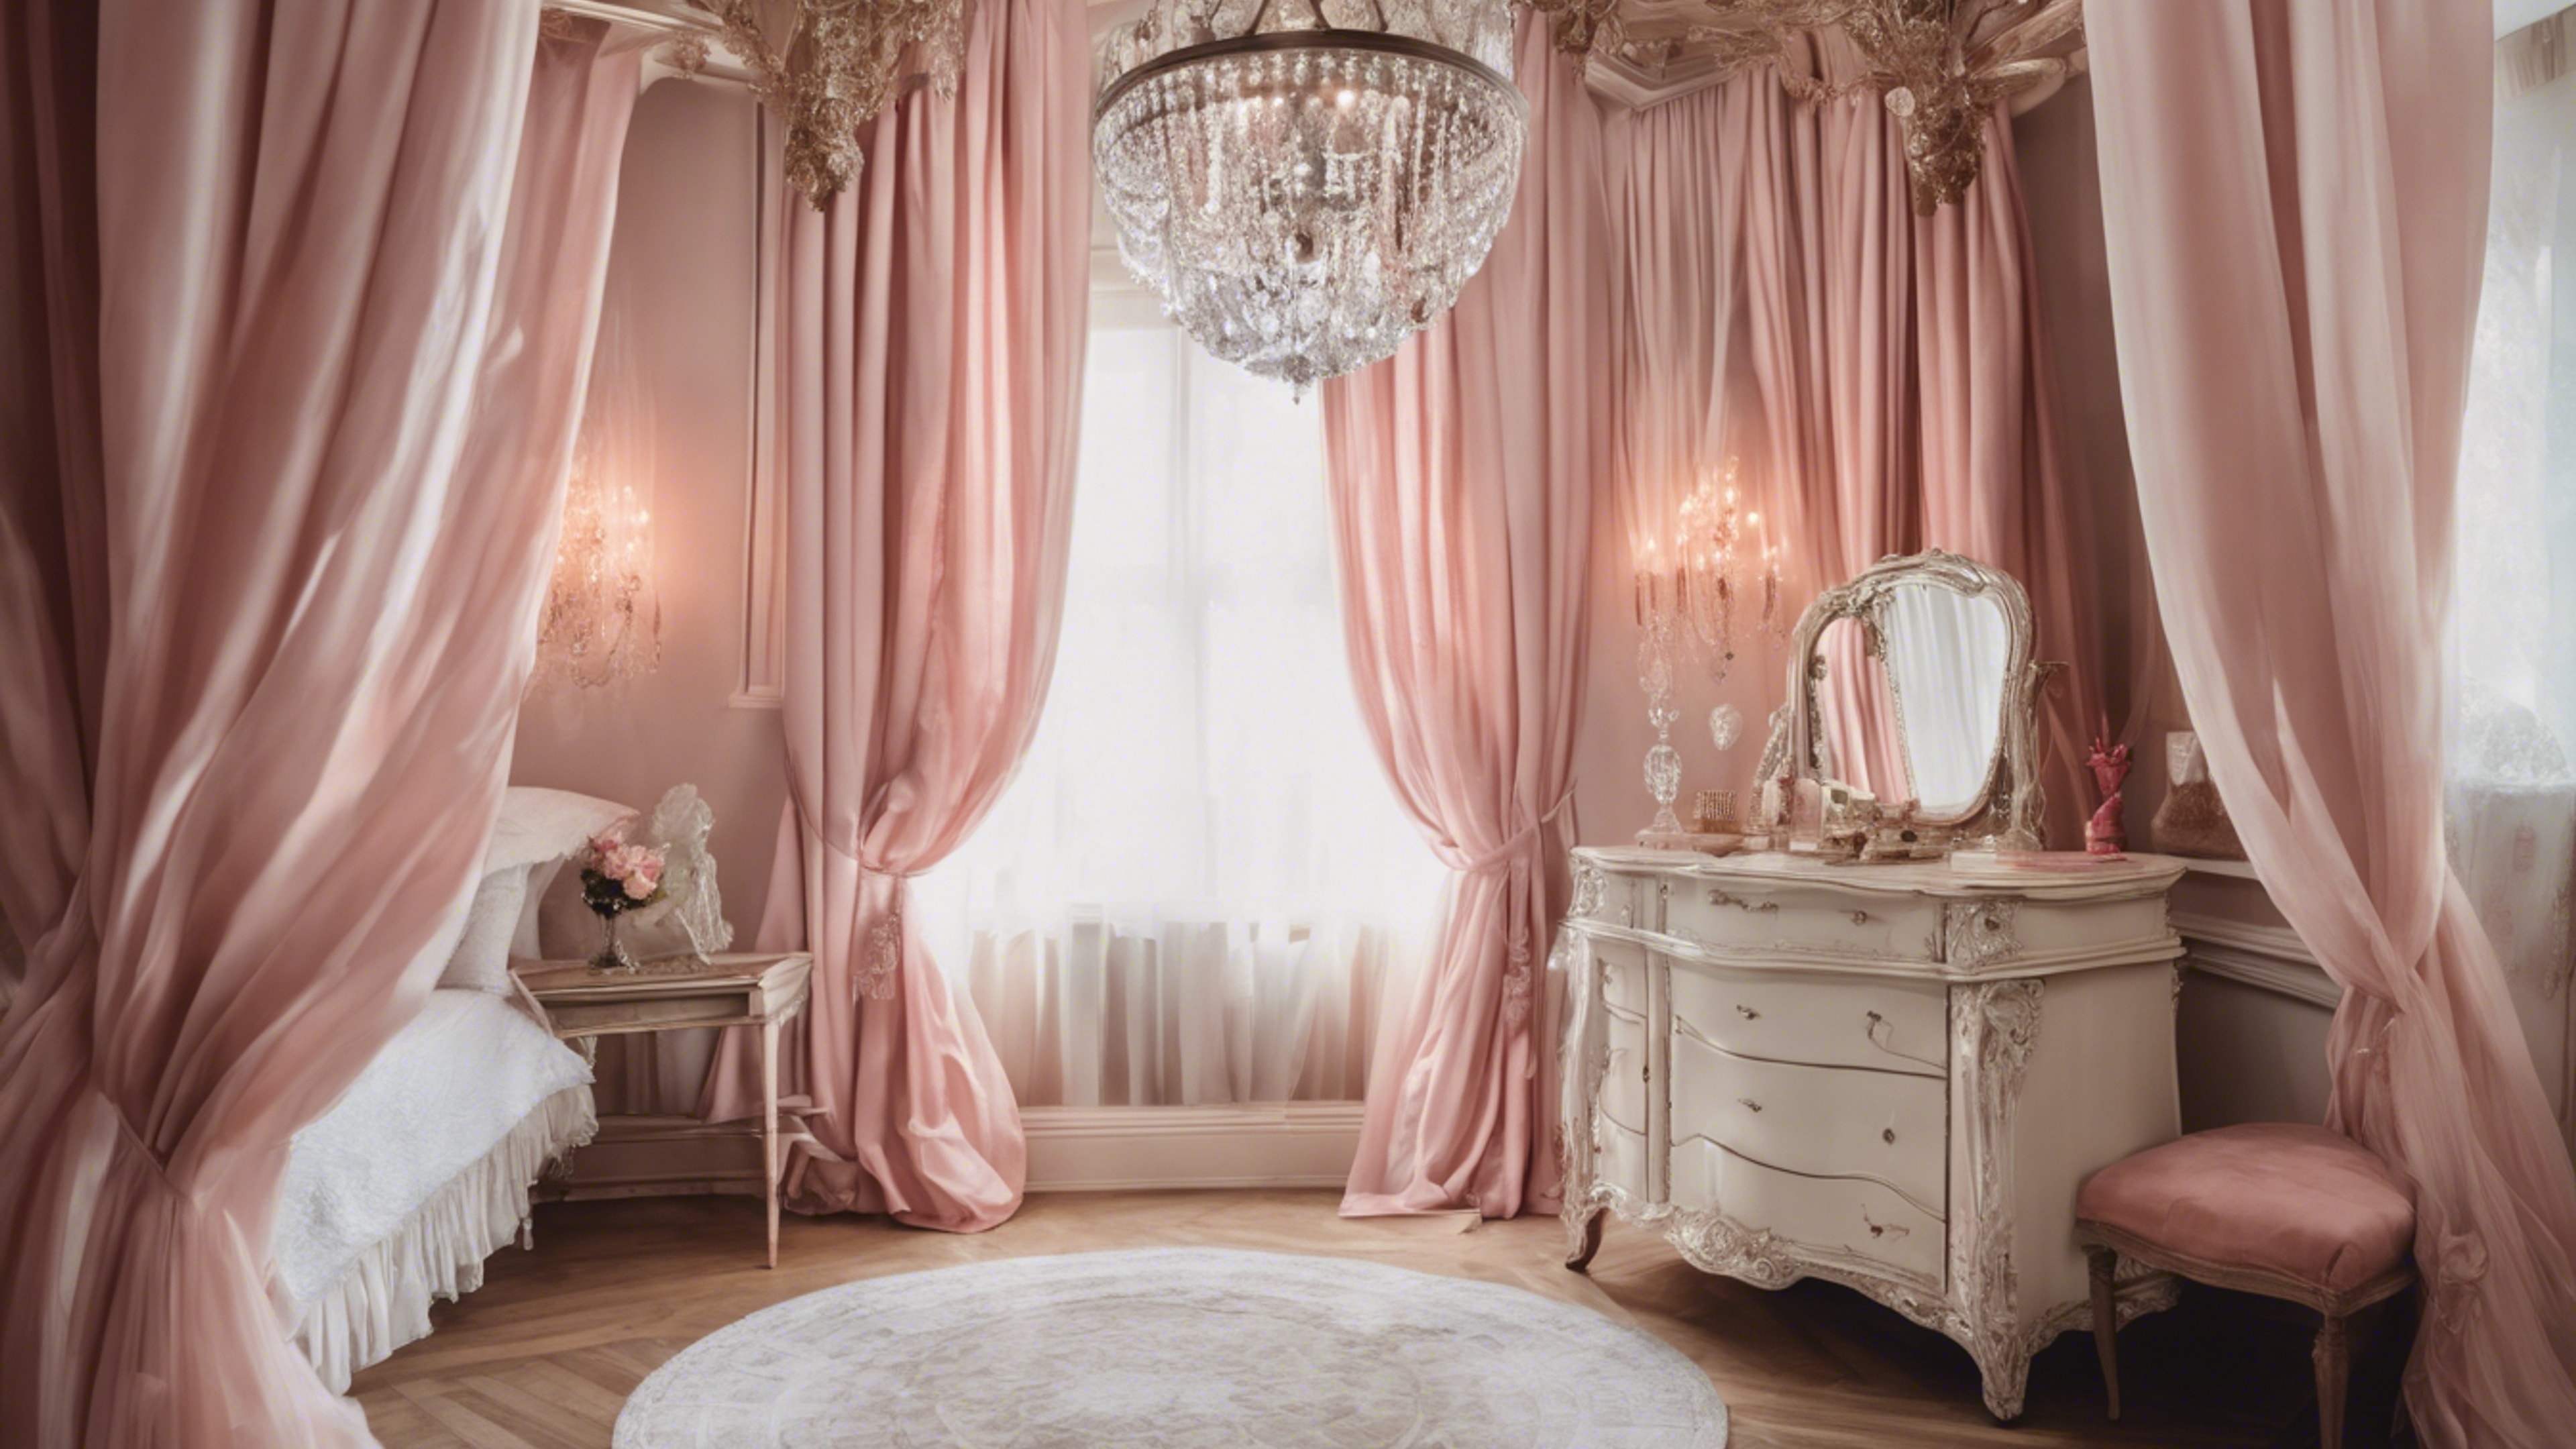 A feminine French bedroom, with canopy bed draped in soft-pink curtains, crystal chandelier hanging overhead, and an elegant antique vanity. Tapet[9a96ceac1df24dd59ae9]